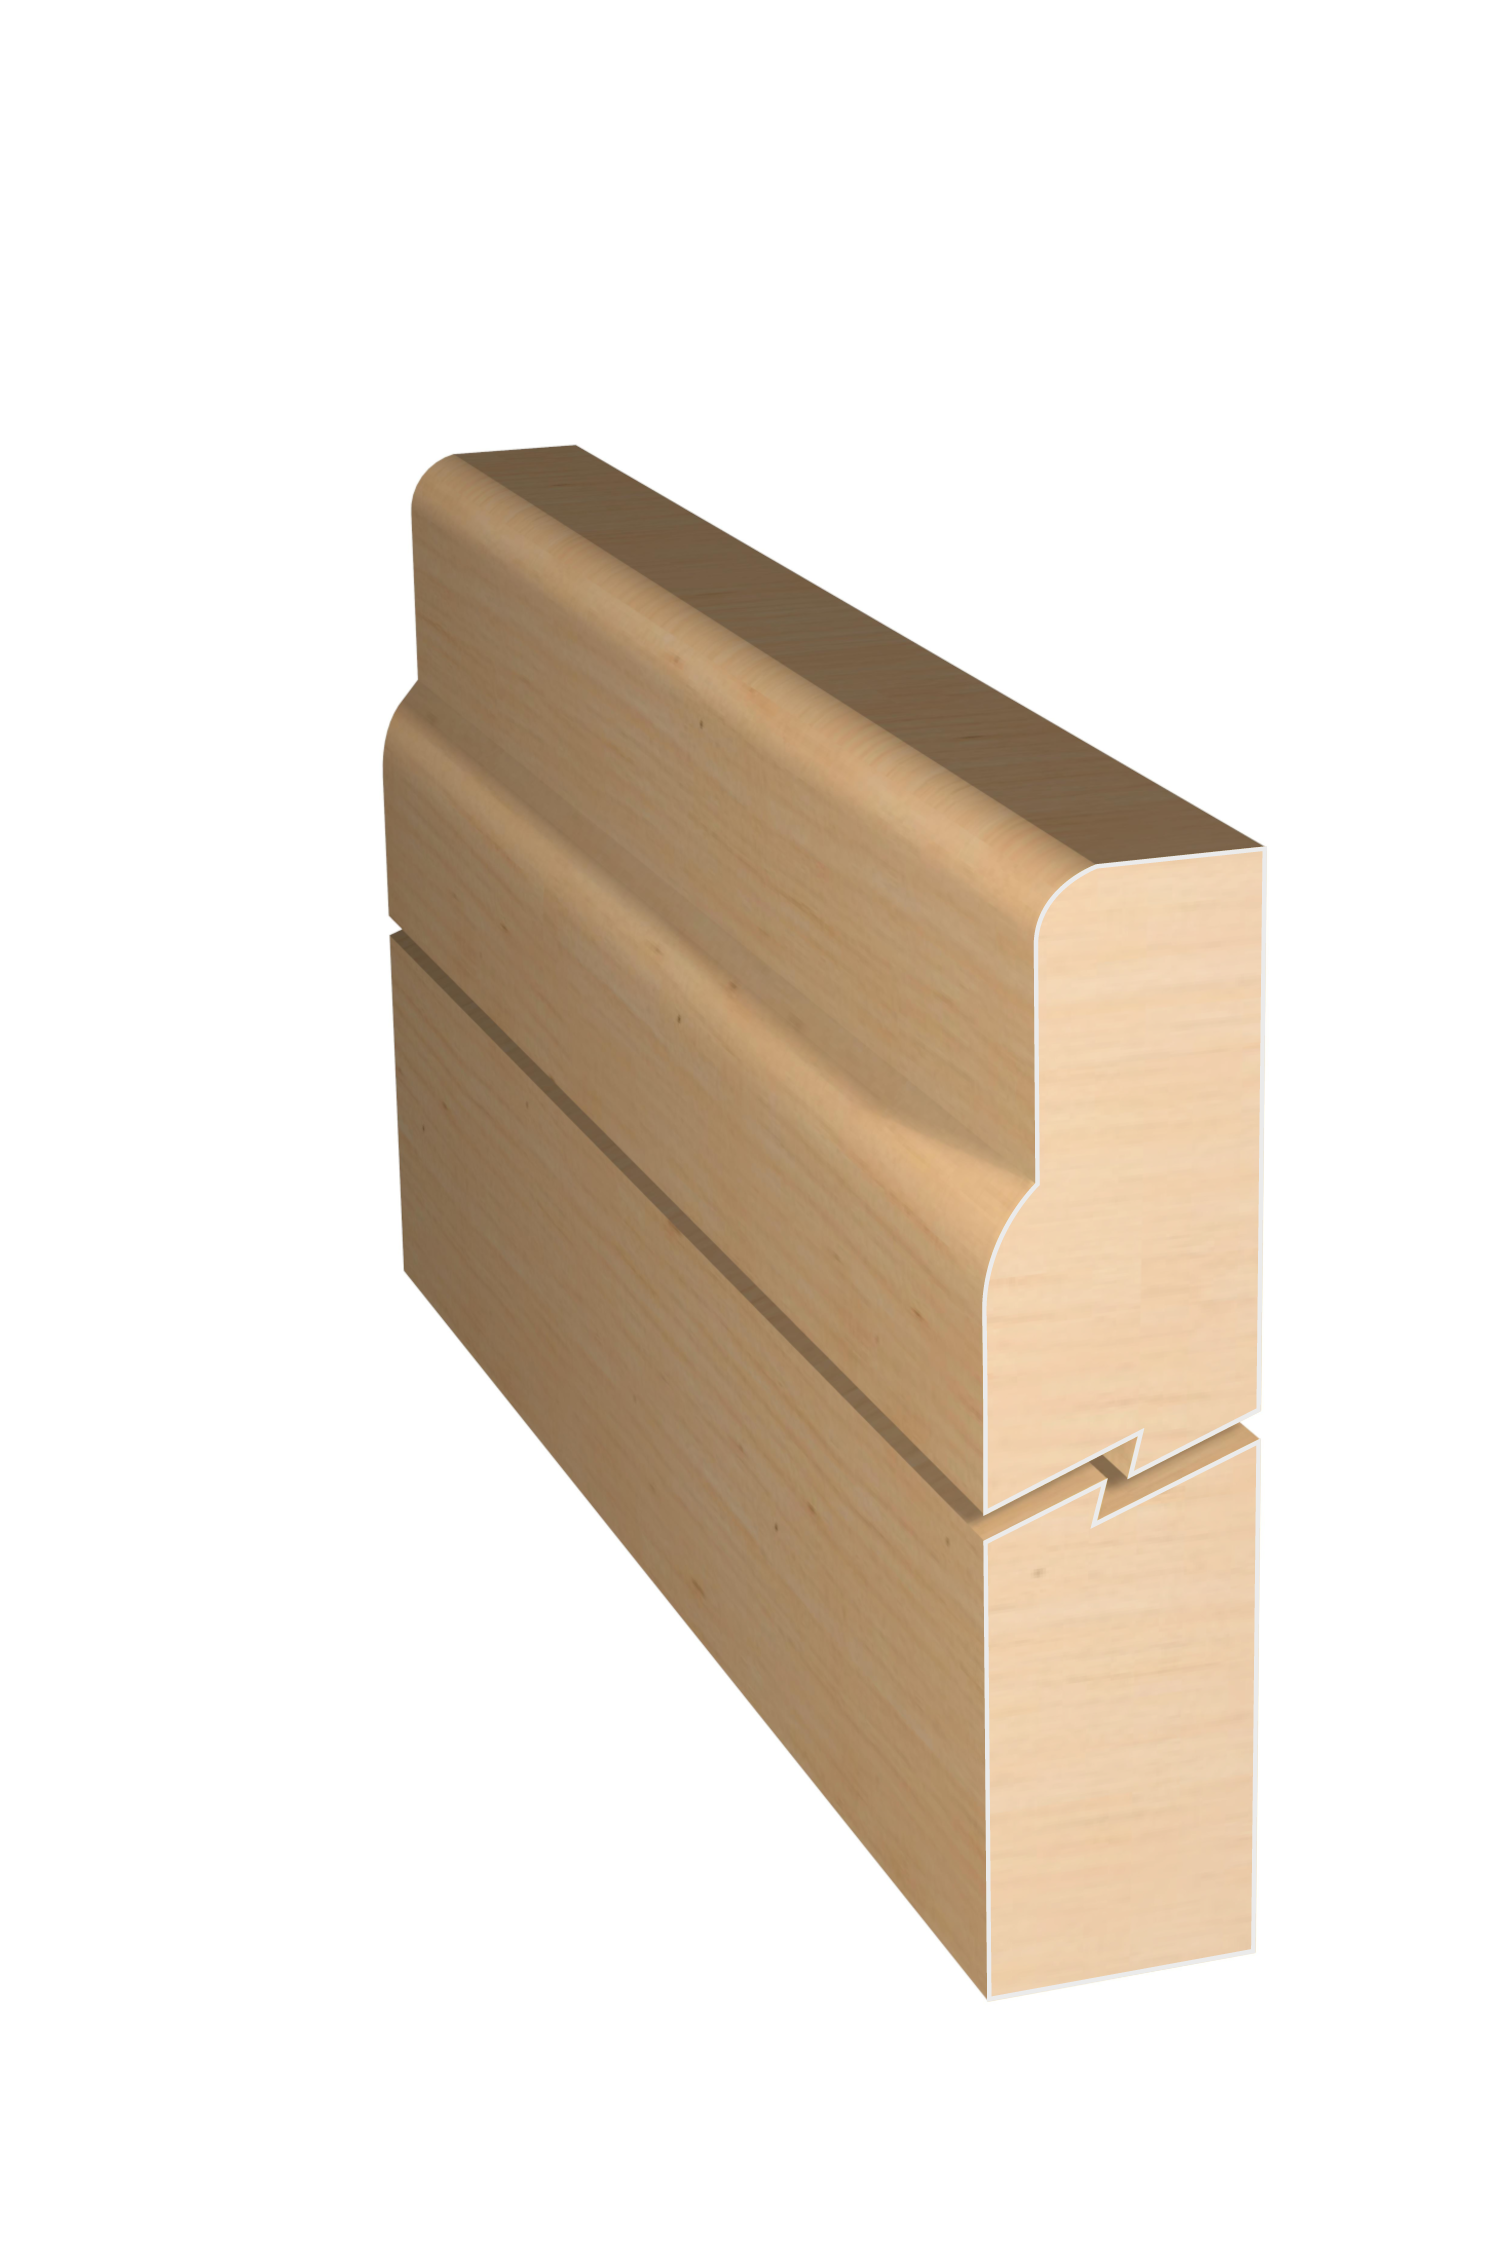 Three dimensional rendering of custom edge profile wood molding SKPL79 made by Public Lumber Company in Detroit.